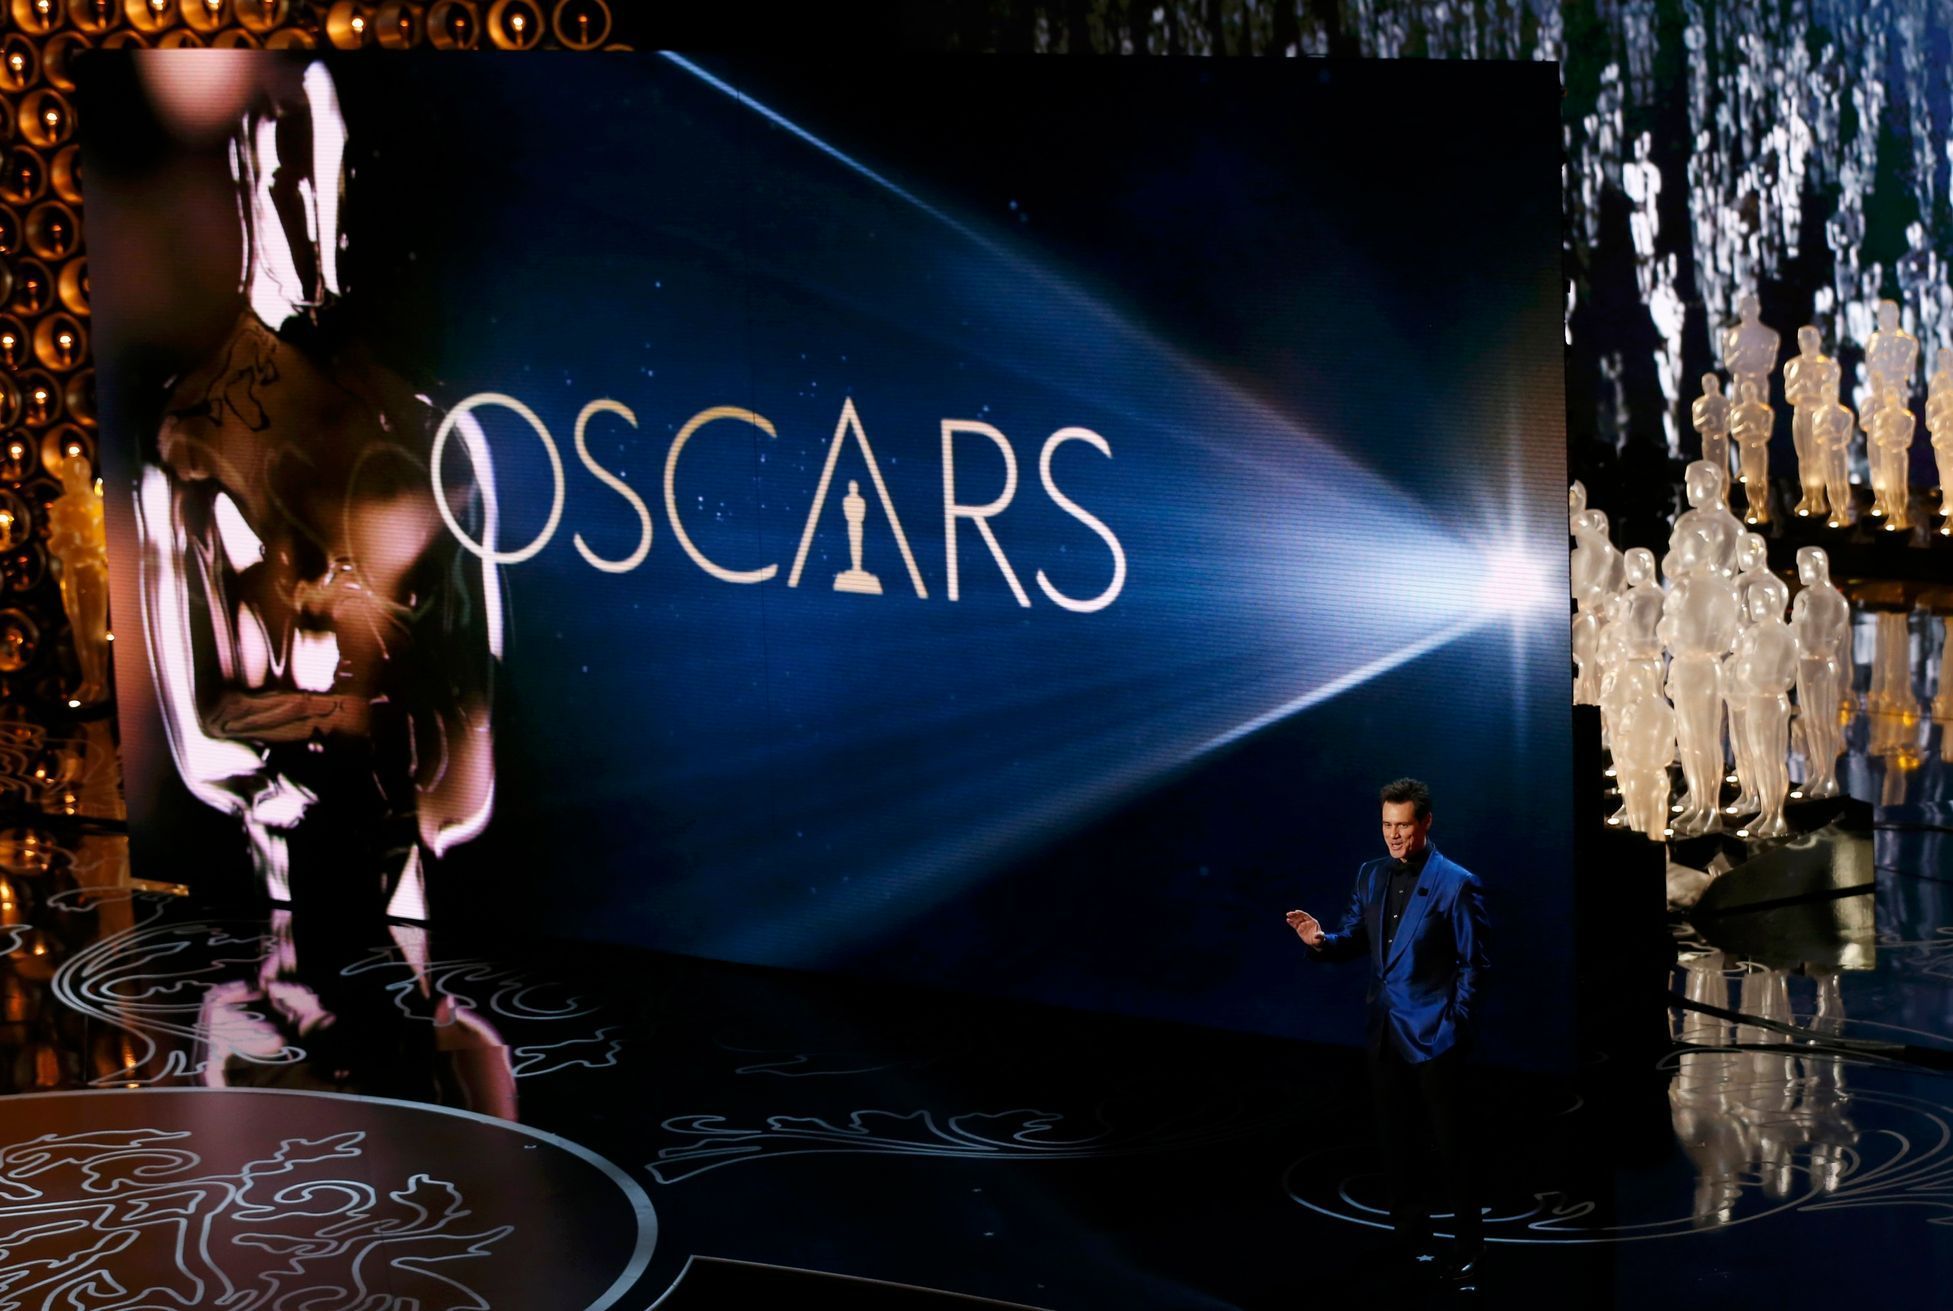 Actor Jim Carrey introduces animated feature clips at the 86th Academy Awards in Hollywood